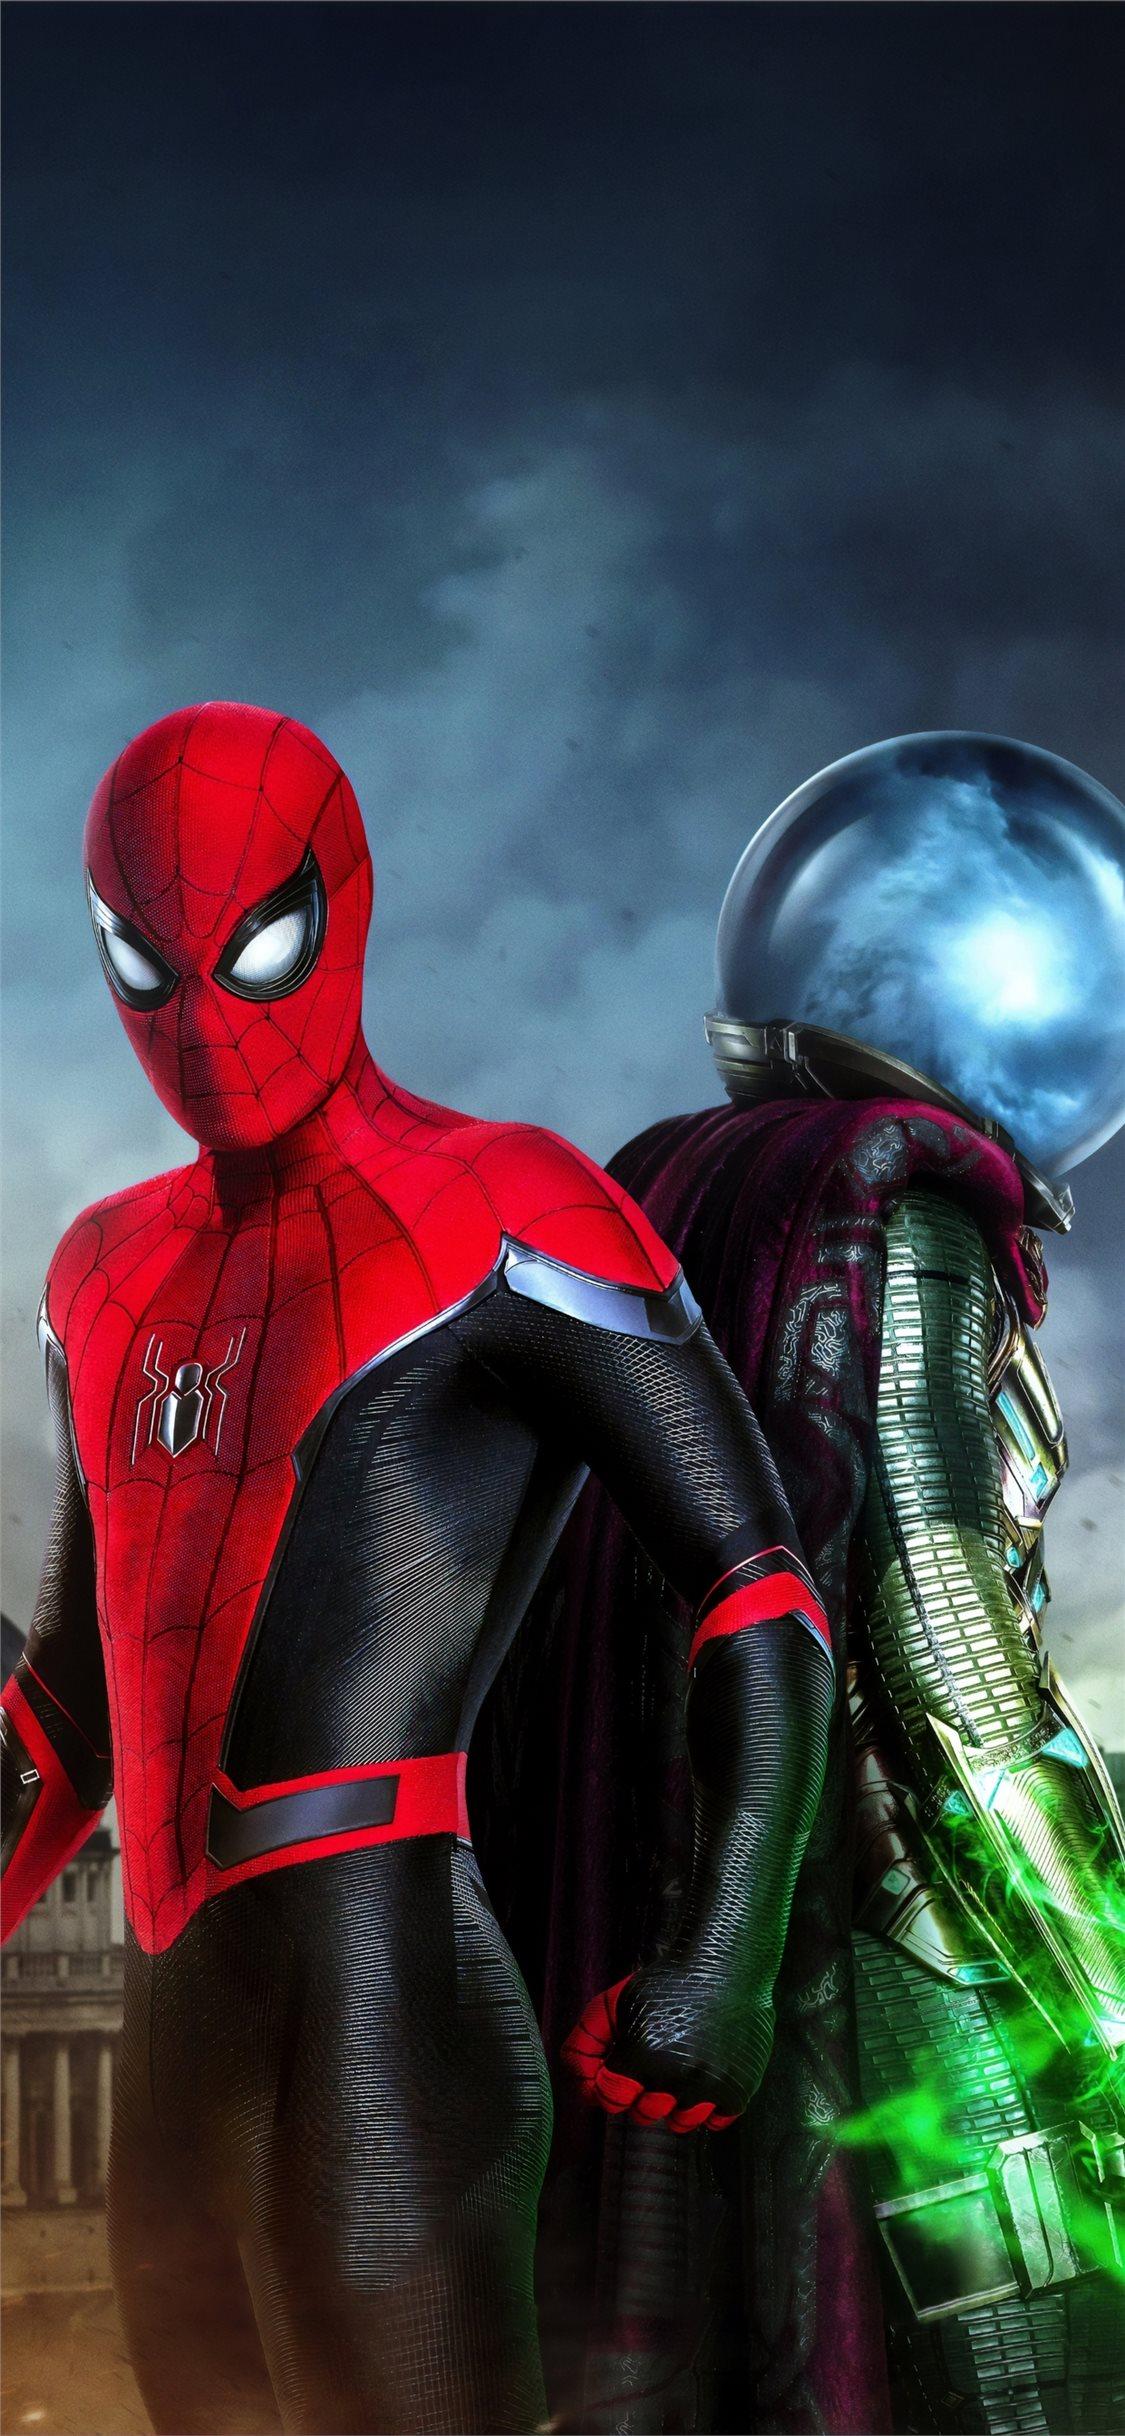 spiderman far from home movie 4k iPhone 11 Wallpaper Free Download